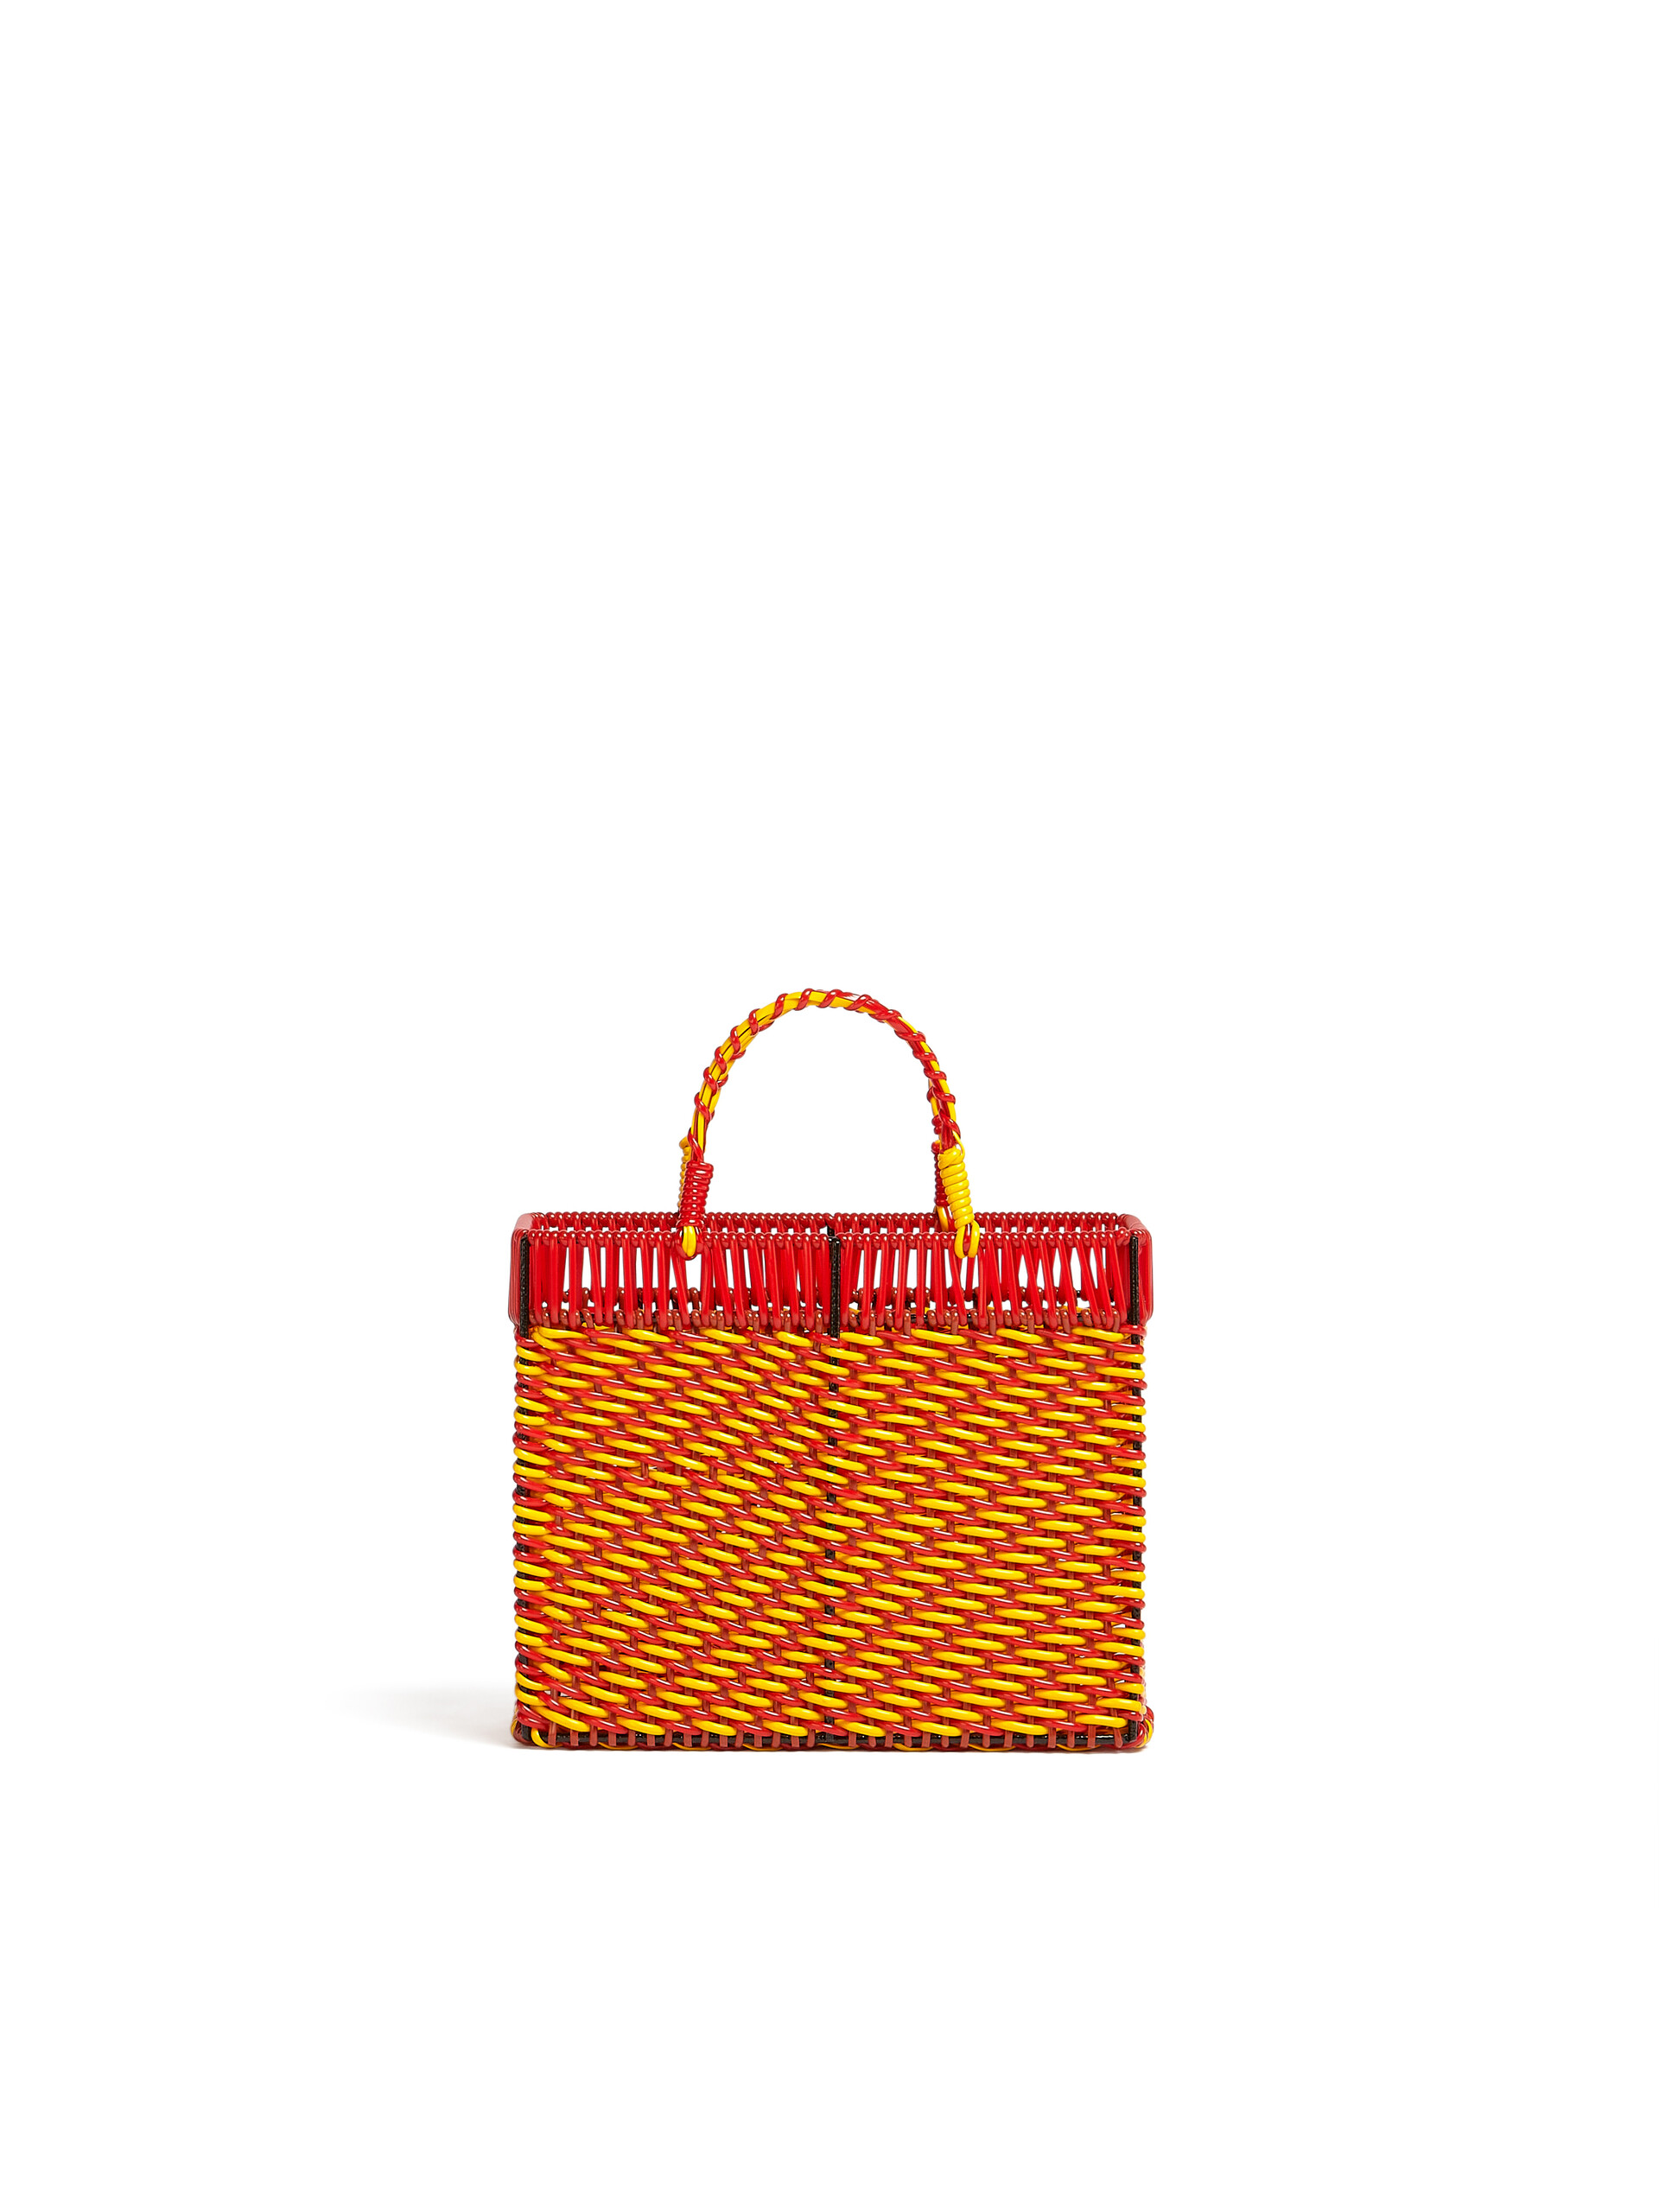 MARNI MARKET basket in iron and orange and red PVC - Home Accessories - Image 3